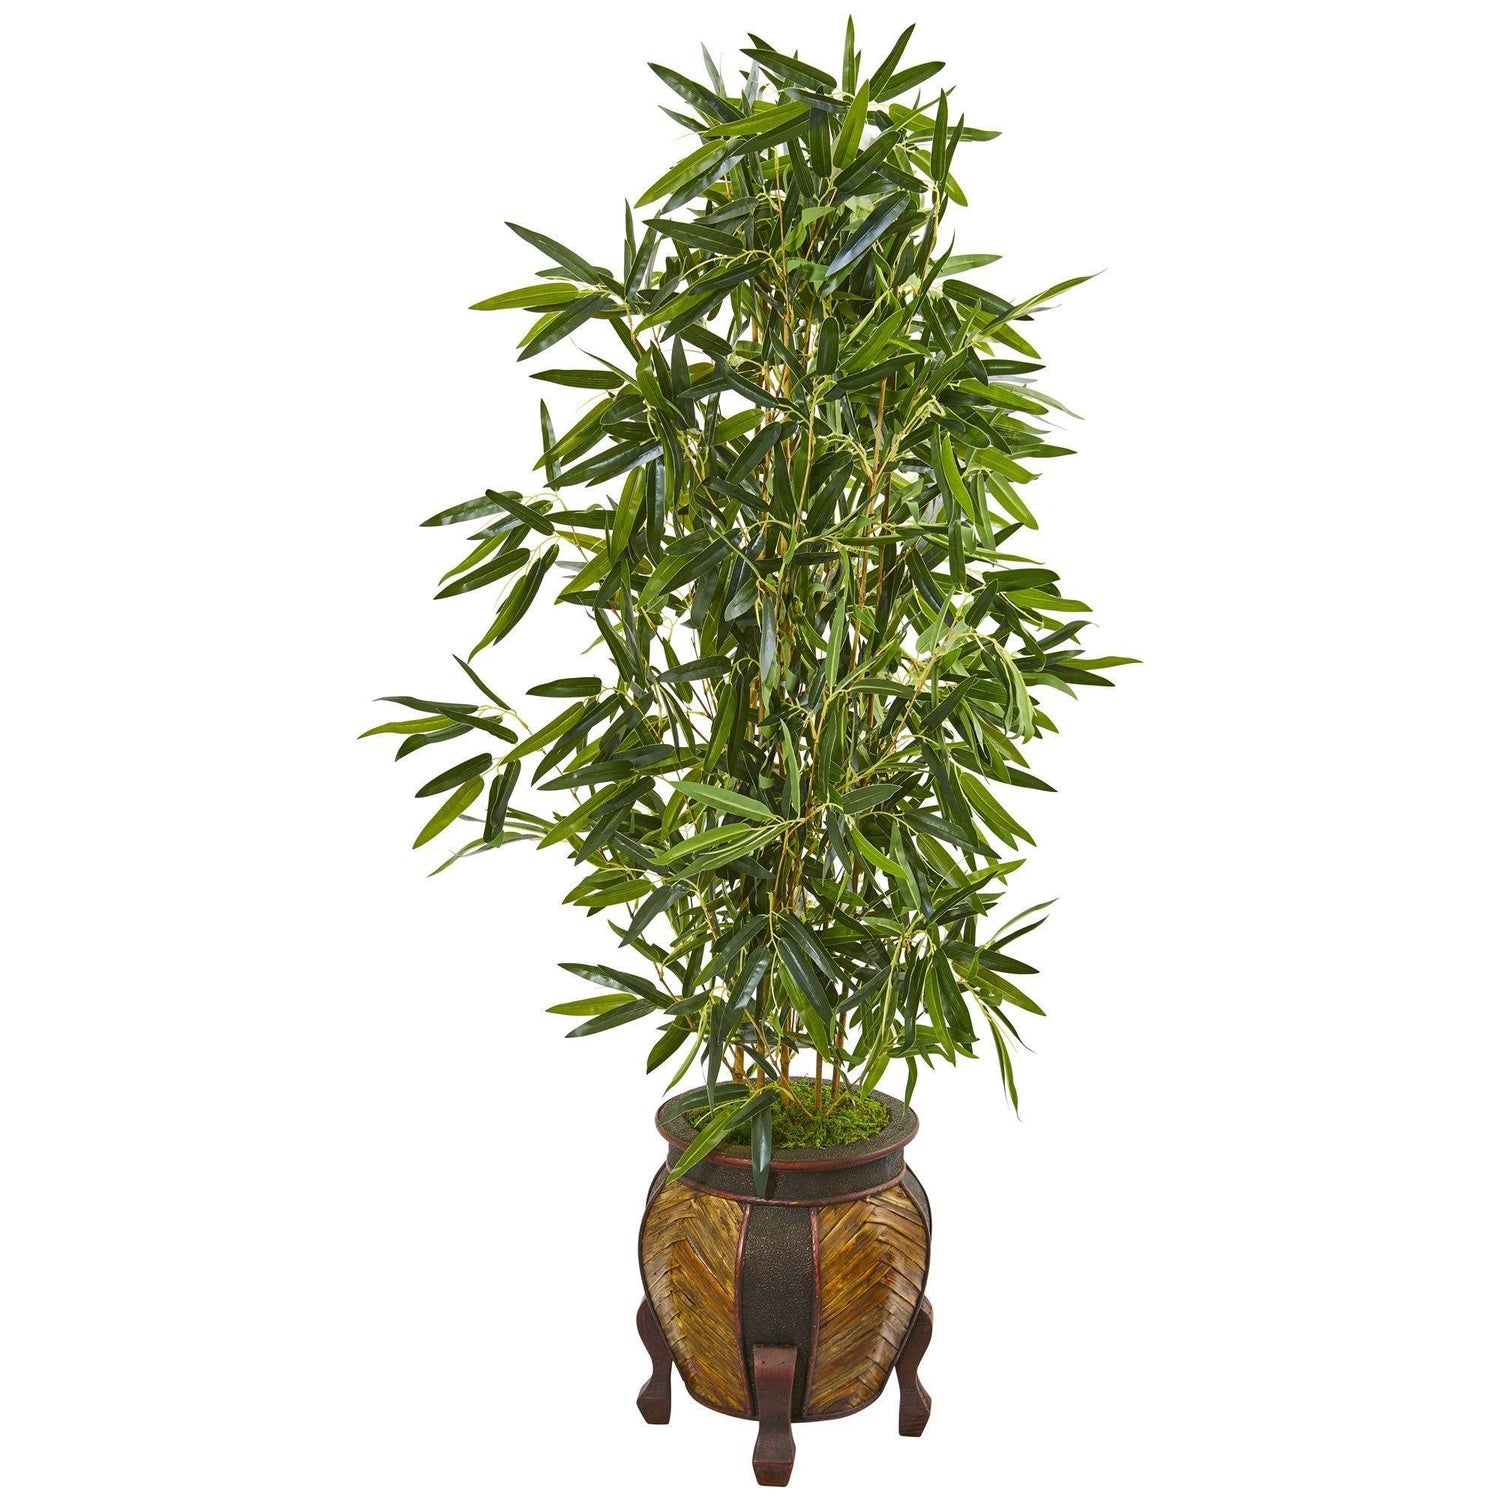 5’ Bamboo Artificial Tree in Decorative Planter (Real Touch)